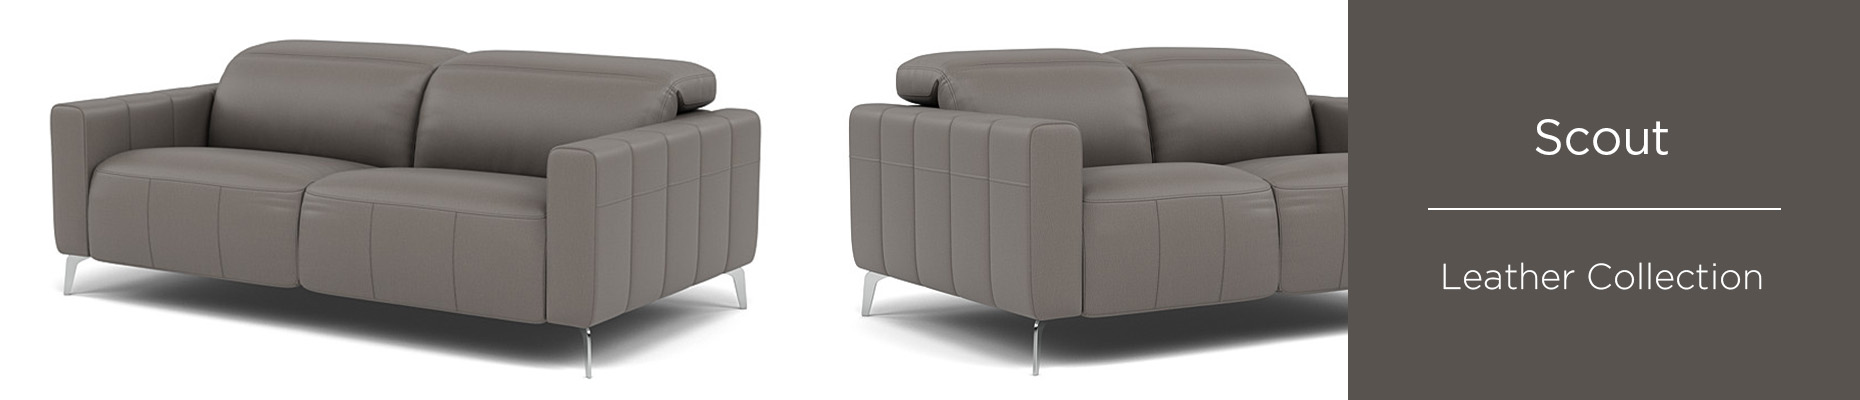 Scout Sofa collection at Forrest Furnishing